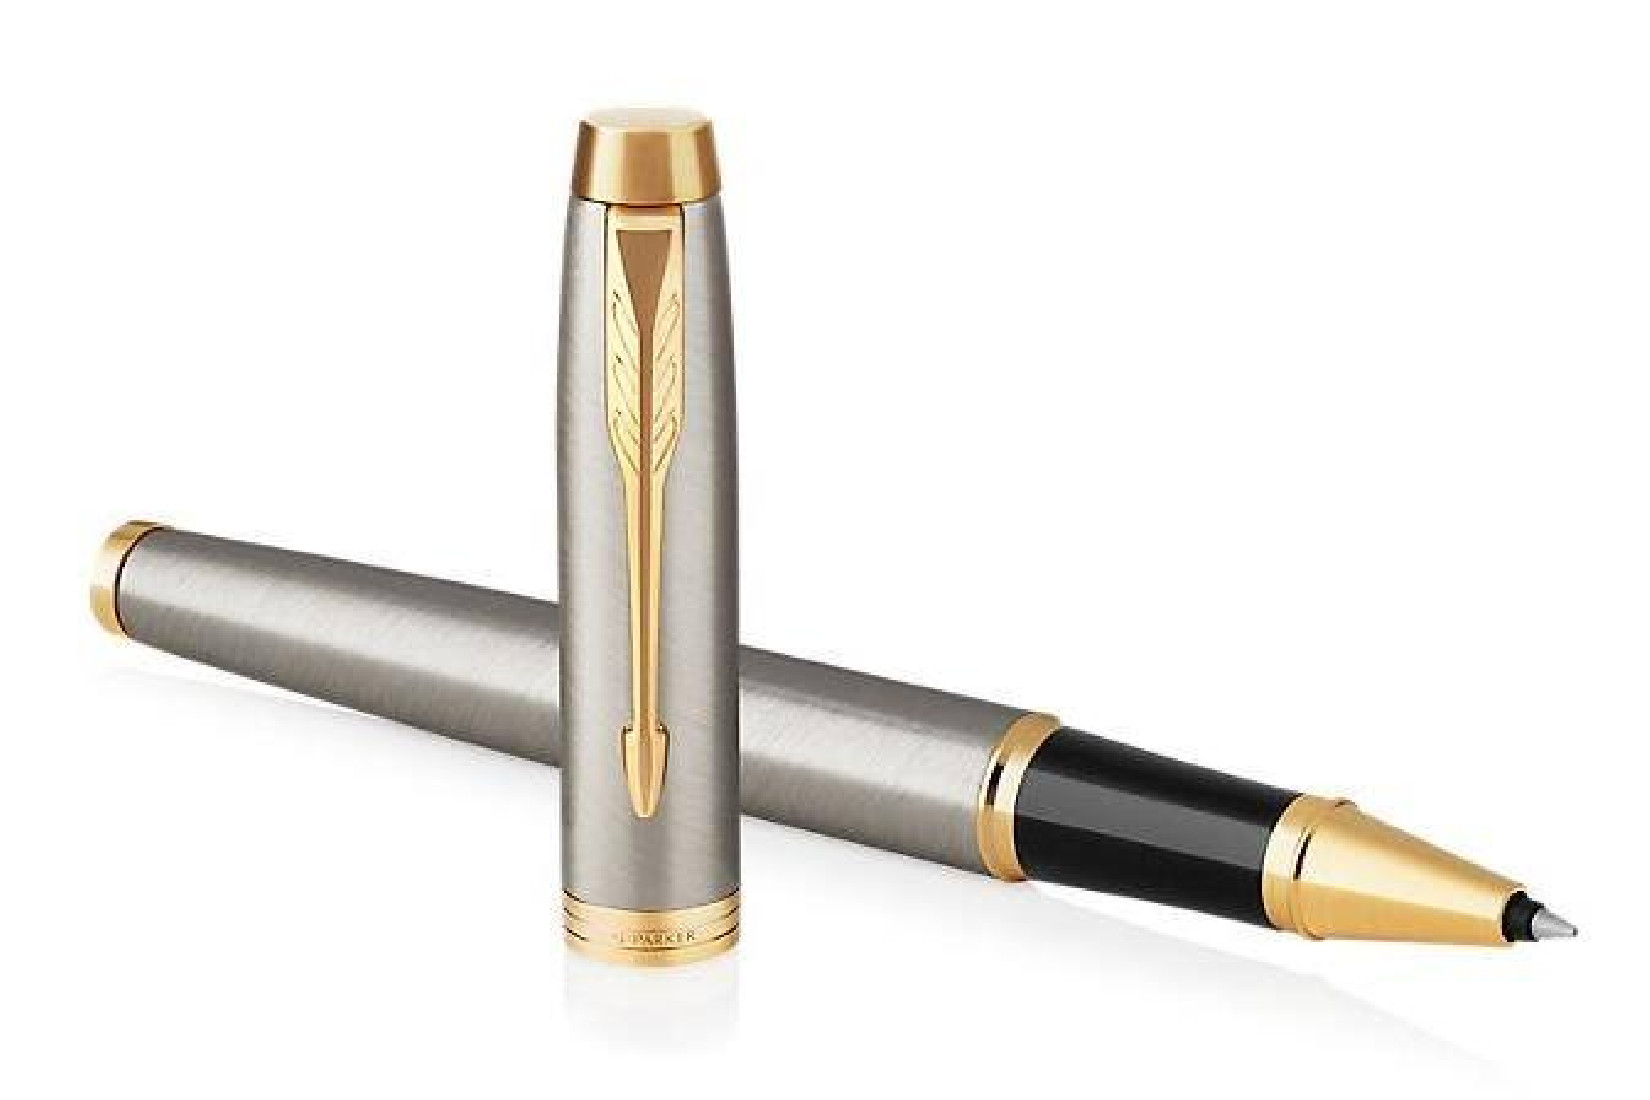 Parker IM Core Brushed Metal GT Rollerball